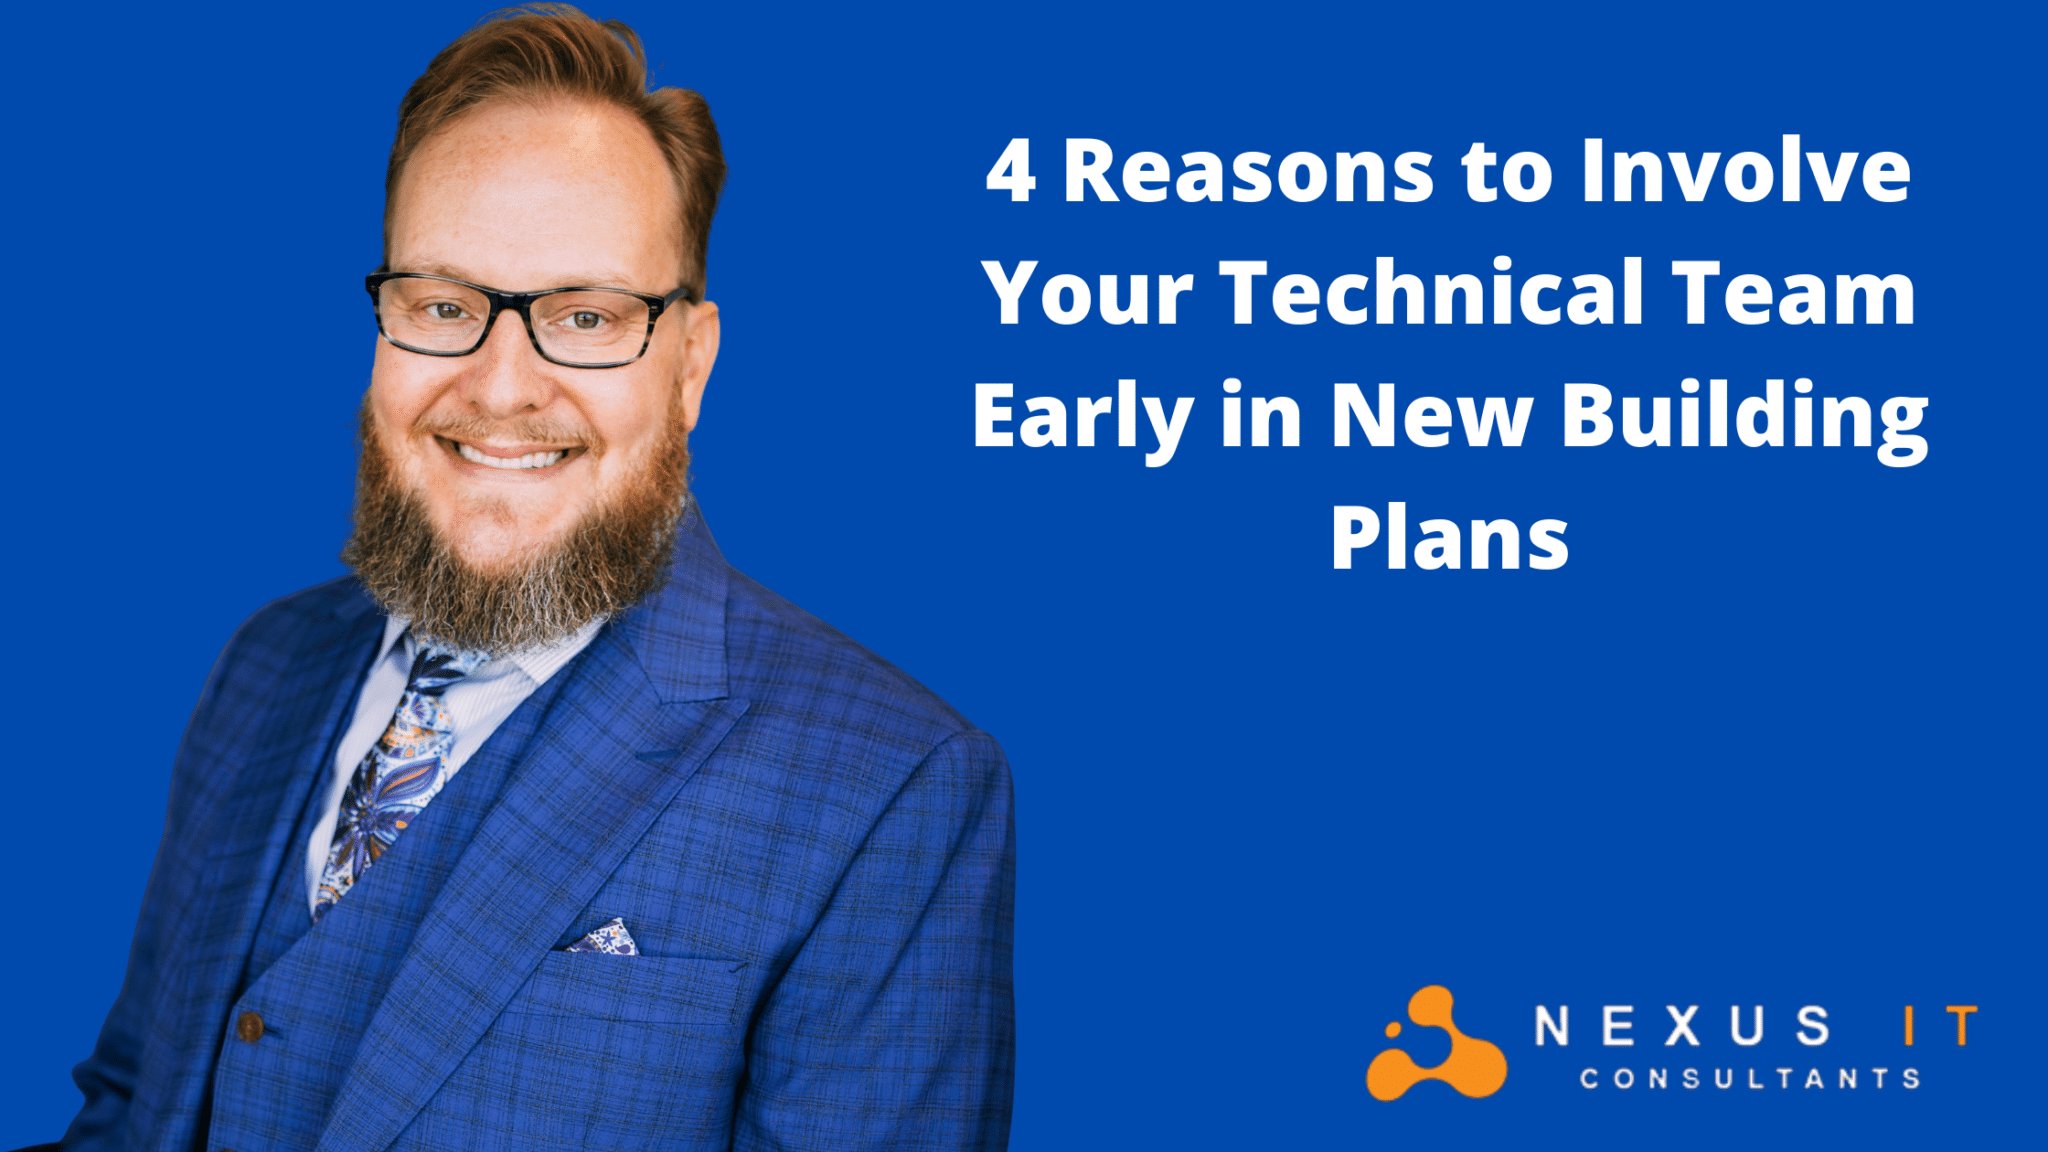 4 Reasons to Involve Your Technical Team Early in New Building Plans